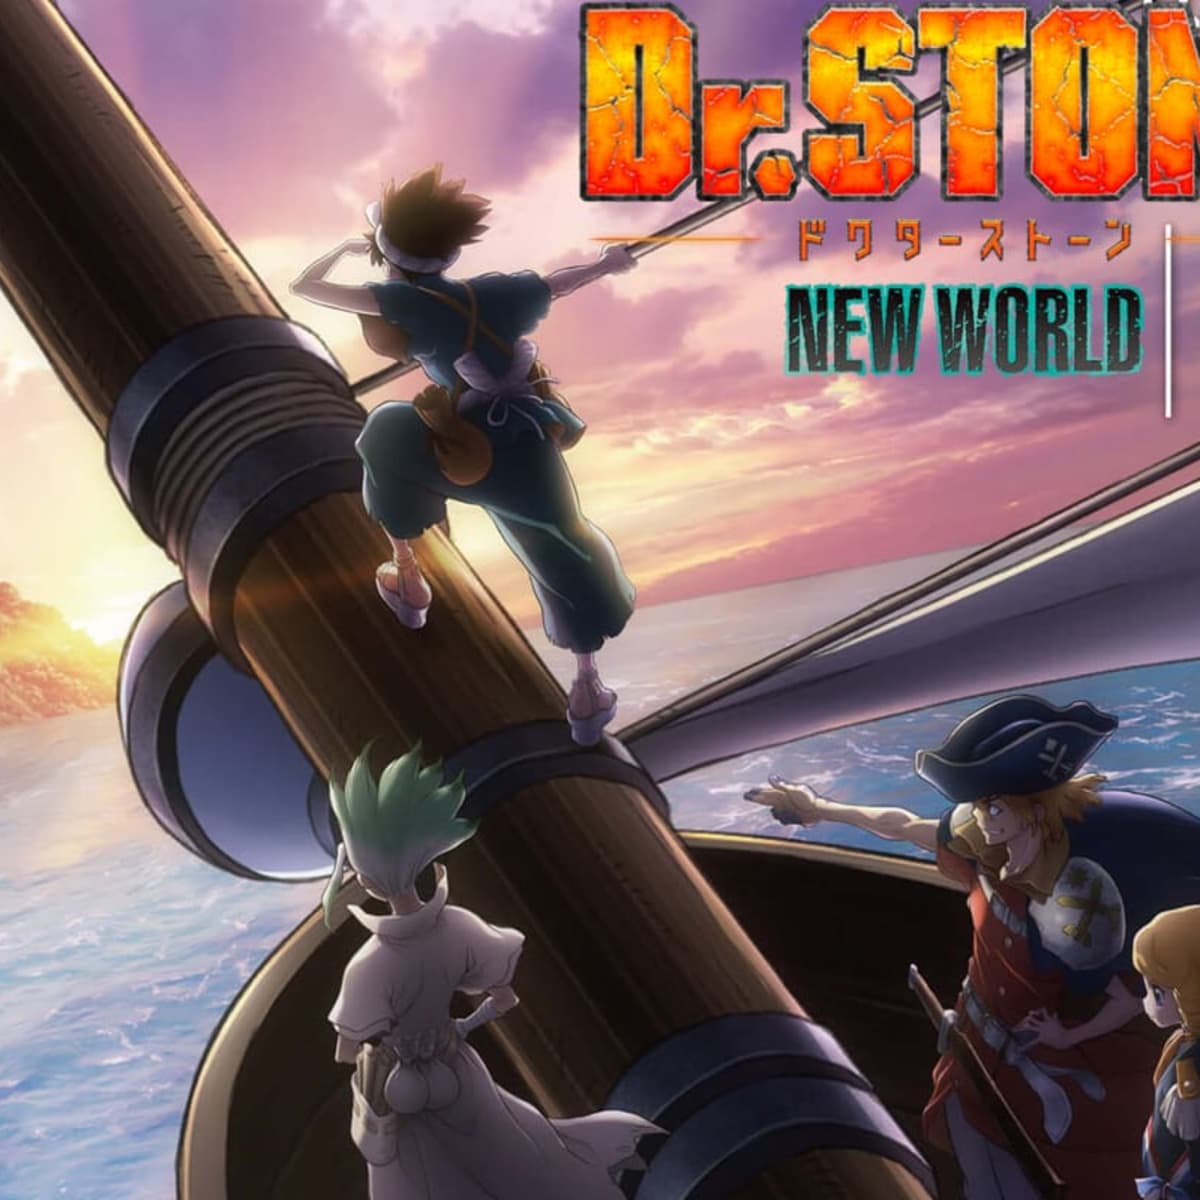 Dr STONE New World - Official Trailer 